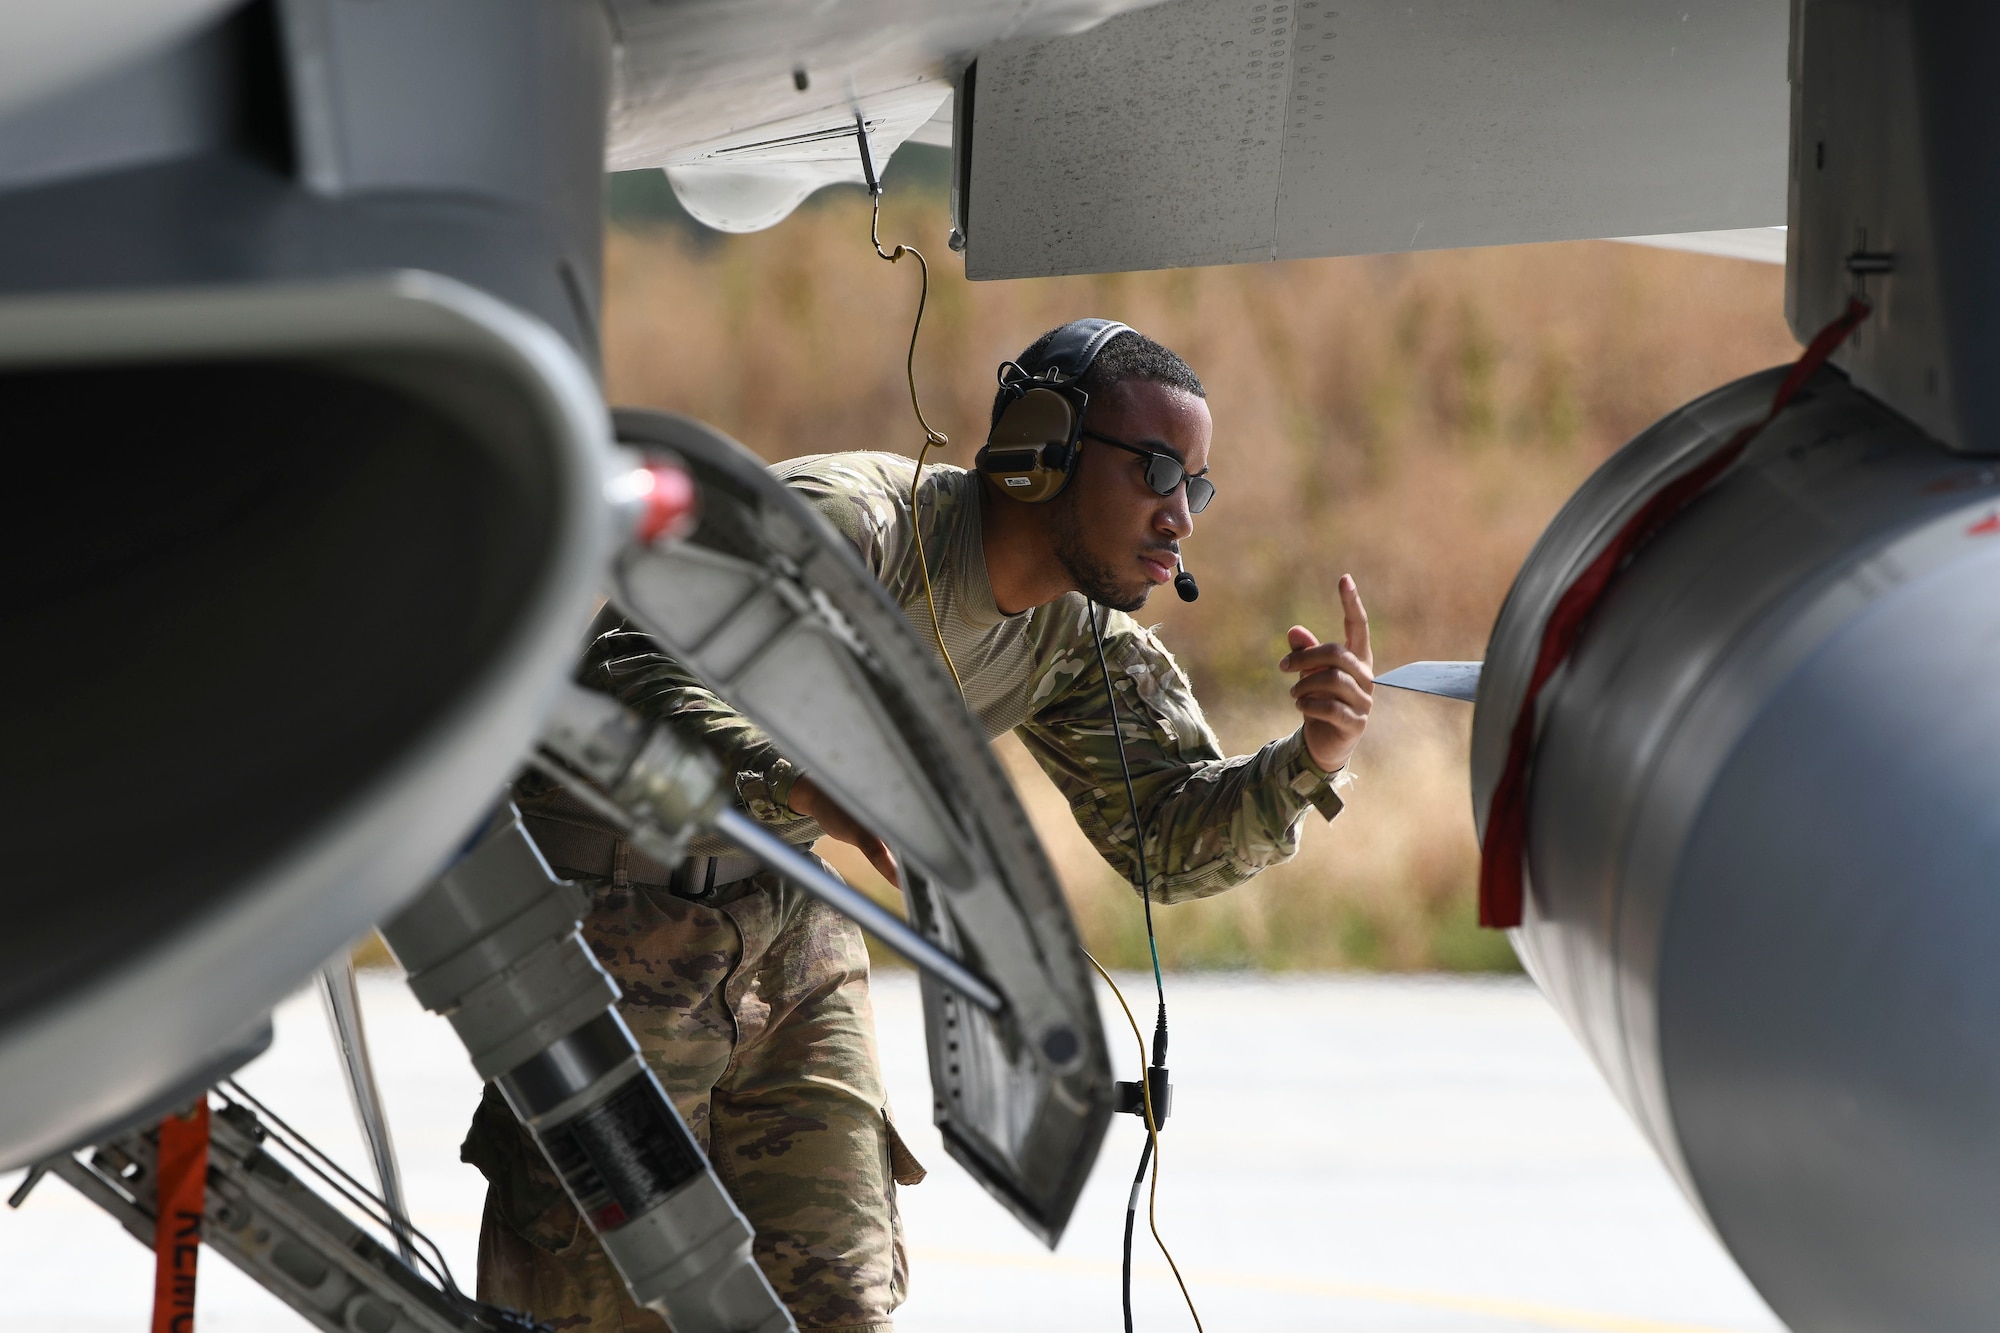 U.S. Air Force Airmen and F-16 Fighting Falcons assigned to the 31st Fighter Wing executed a rapid deployment to conduct “hot pit” refueling and participate in the bilateral training exercise with the Bulgarian Air Force.